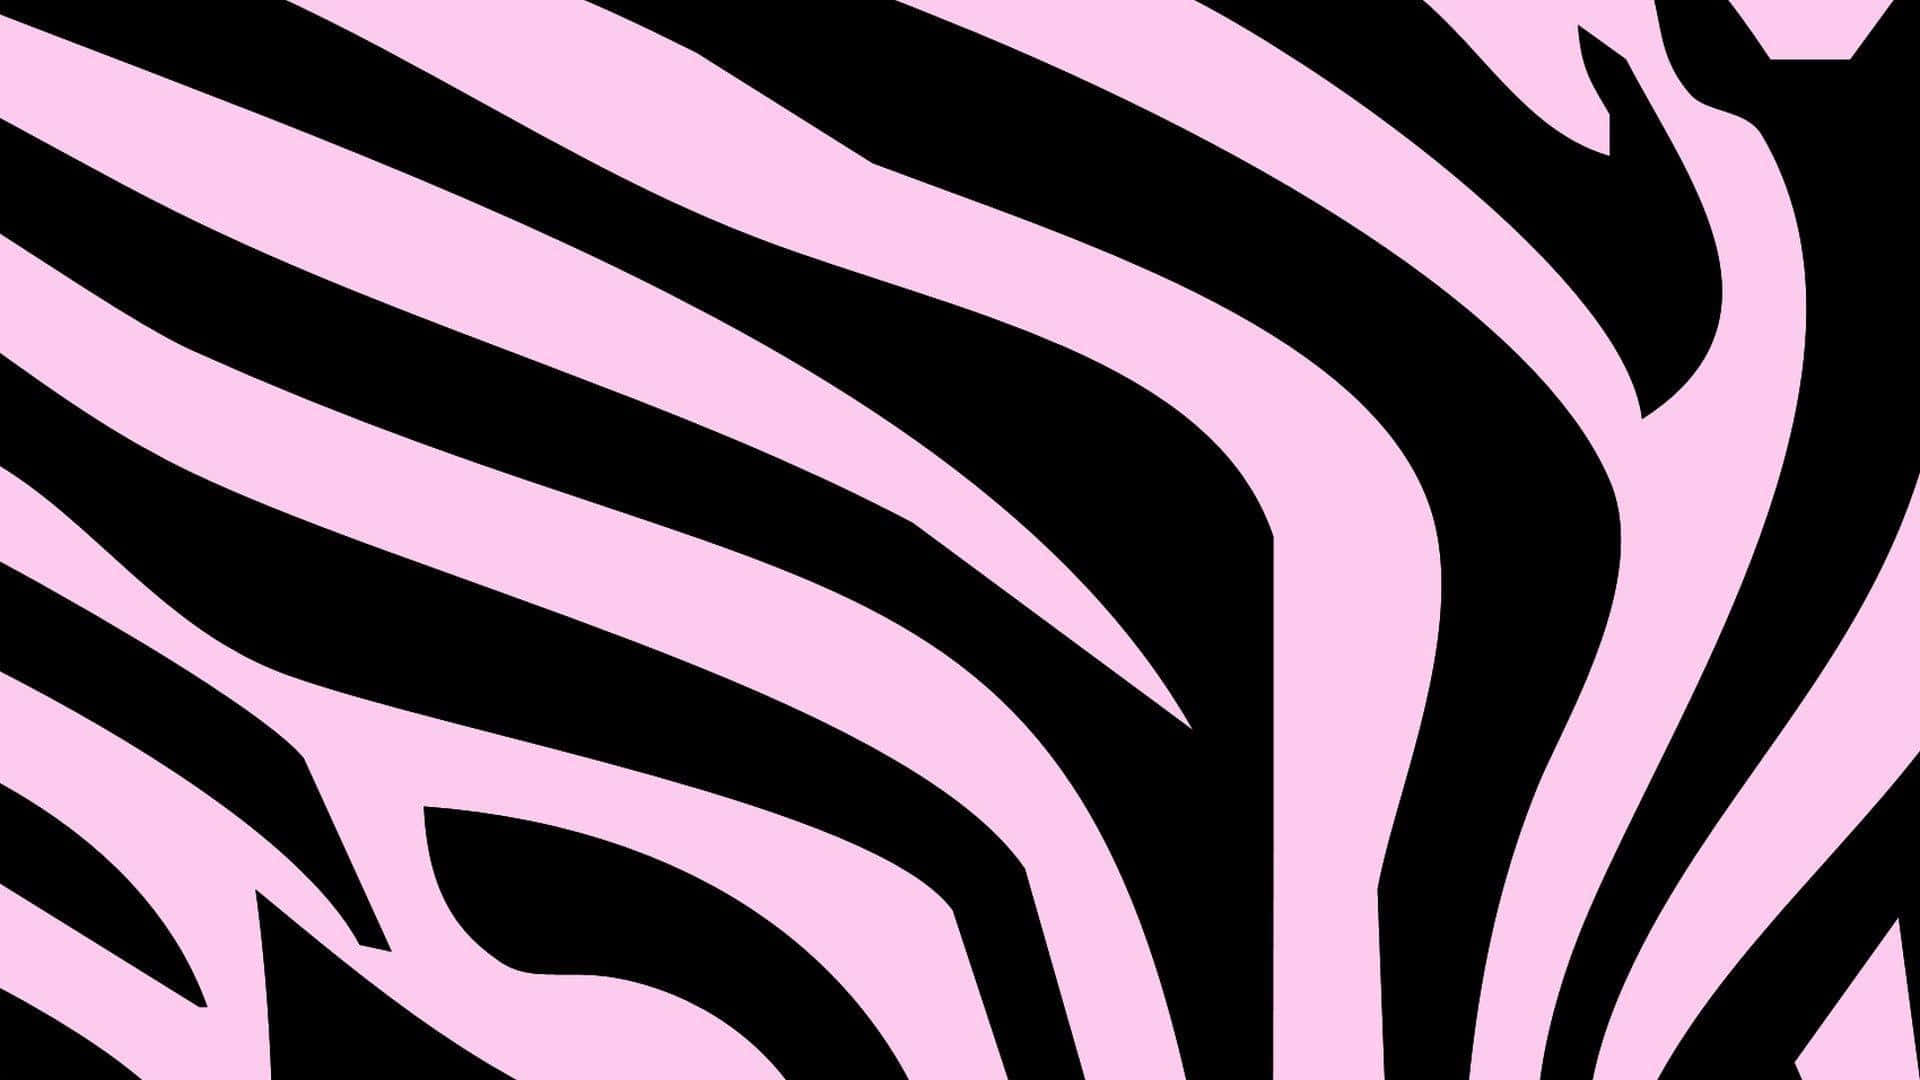 An Artistic Arrangement Of Pink And White Stripes Background